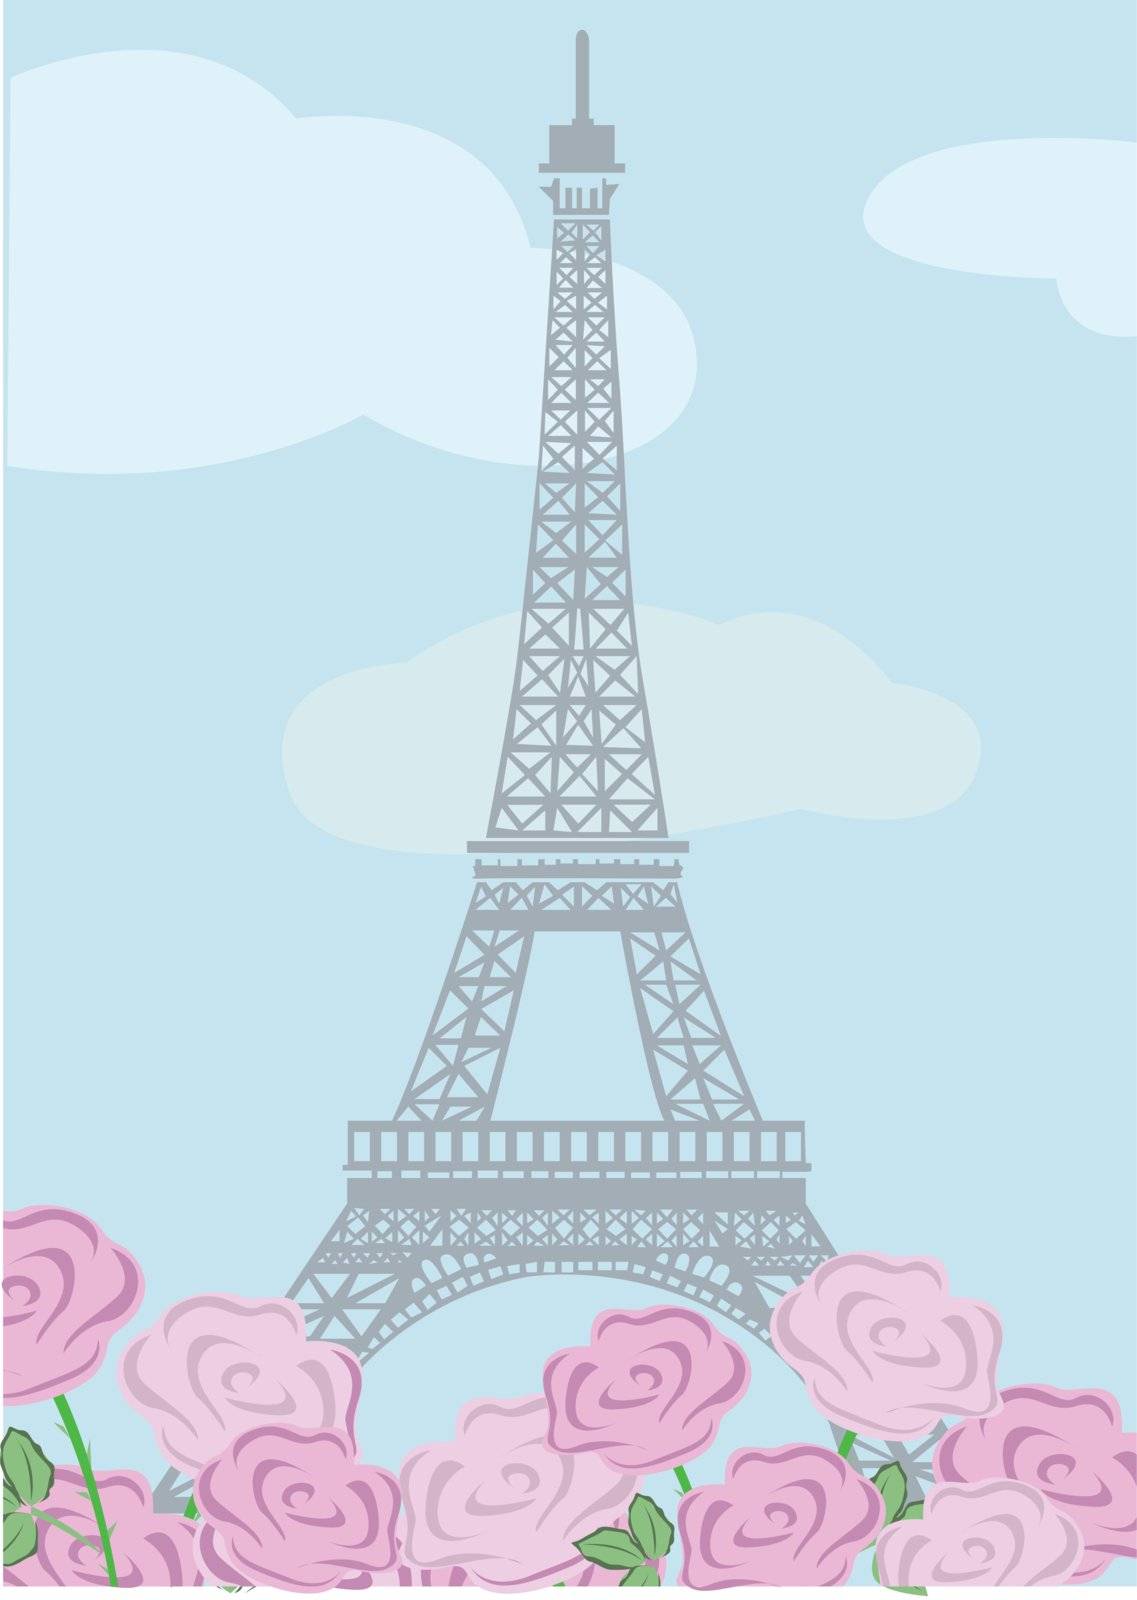 Eiffel tower with roses by Marishkayu